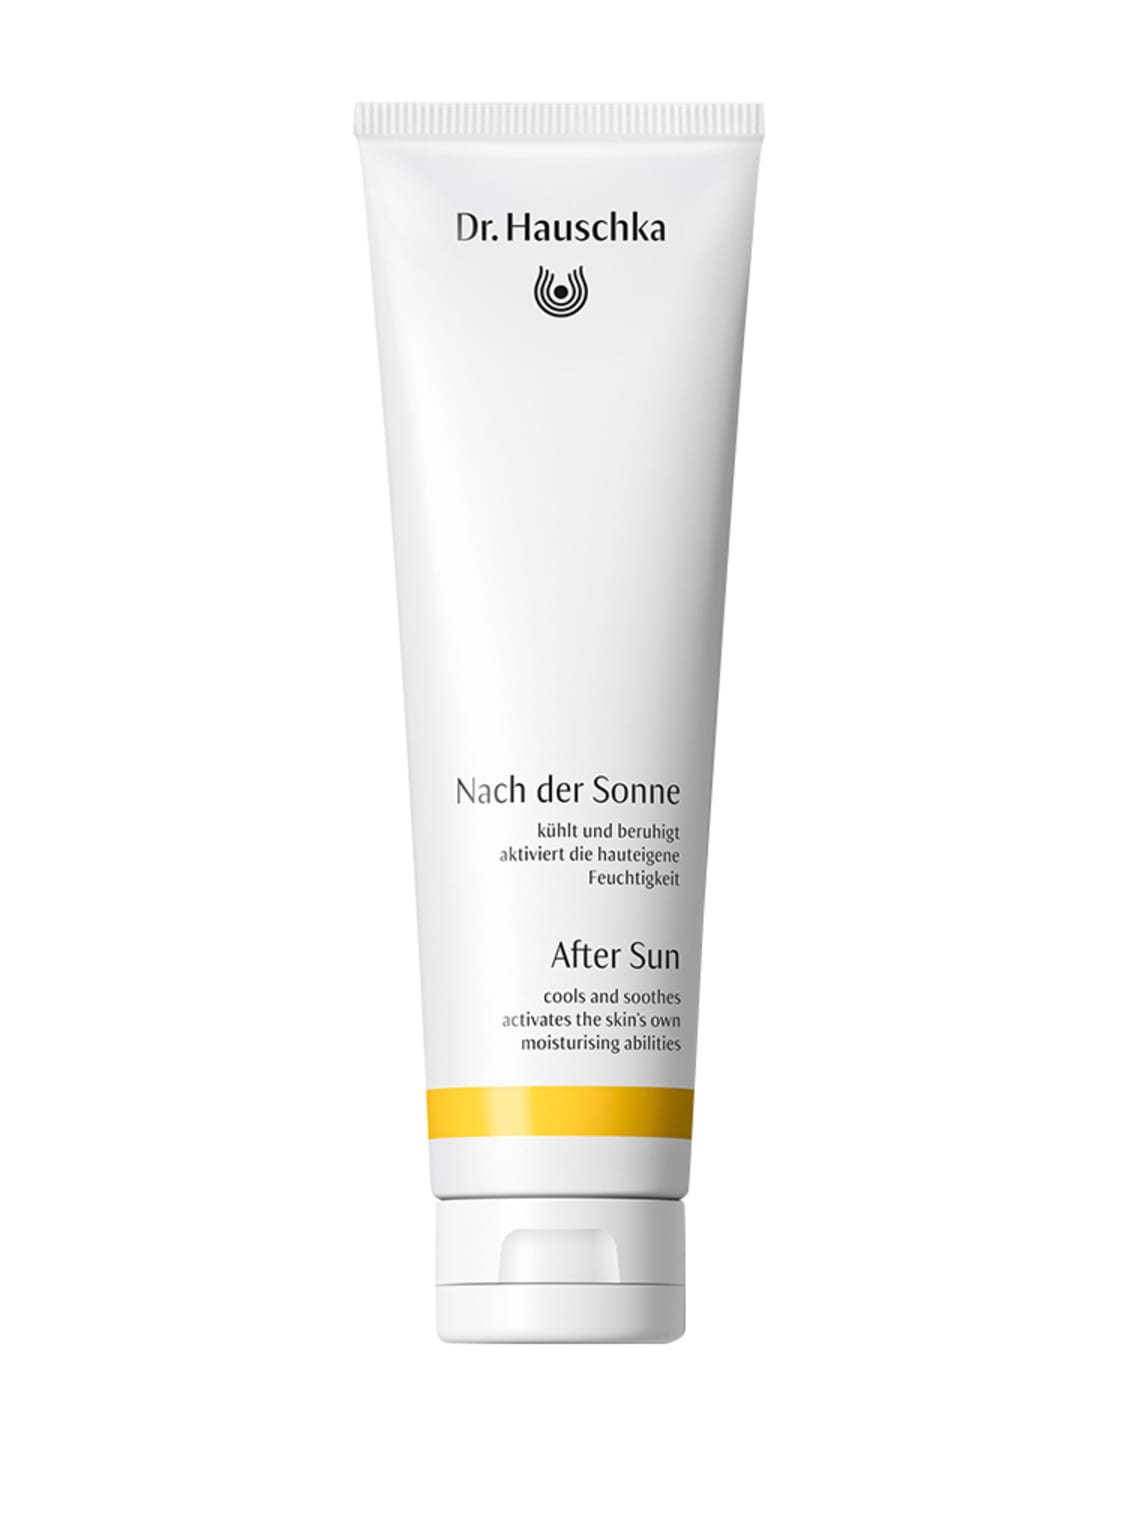 Image of Dr. Hauschka After Sun After Sun Lotion 150 ml